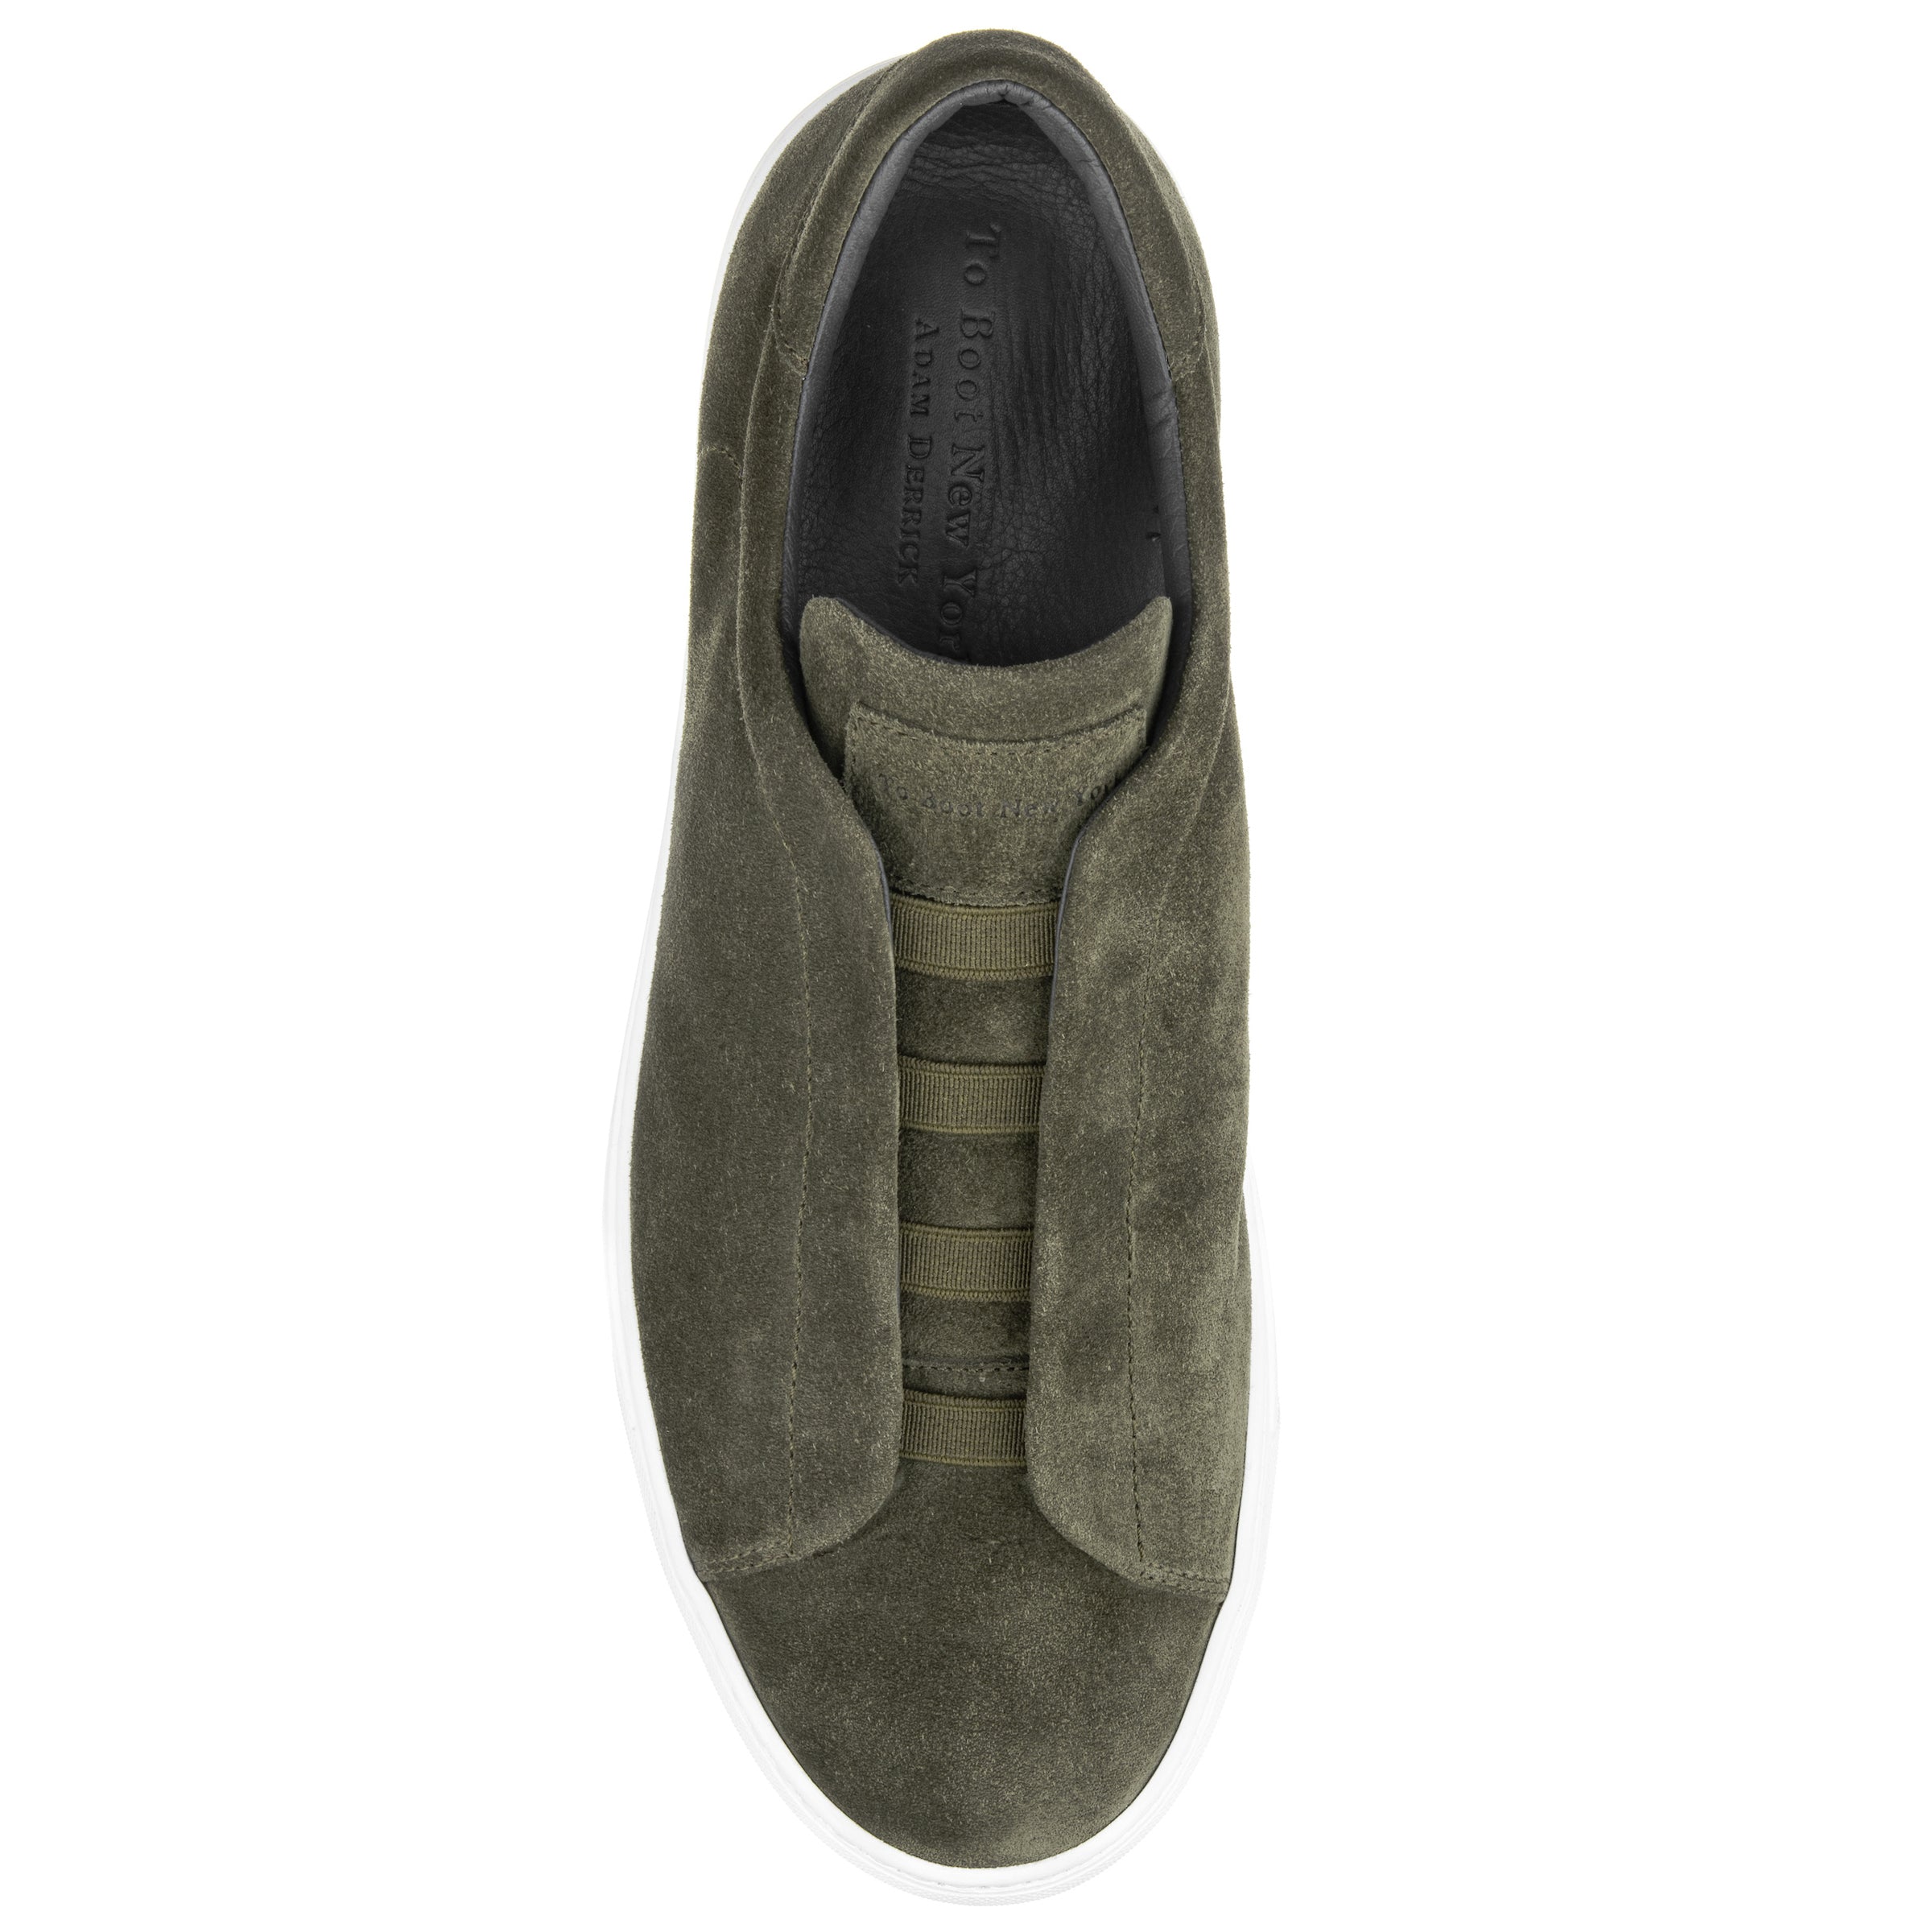 Stone Central Park Green Suede Slip On Sneaker